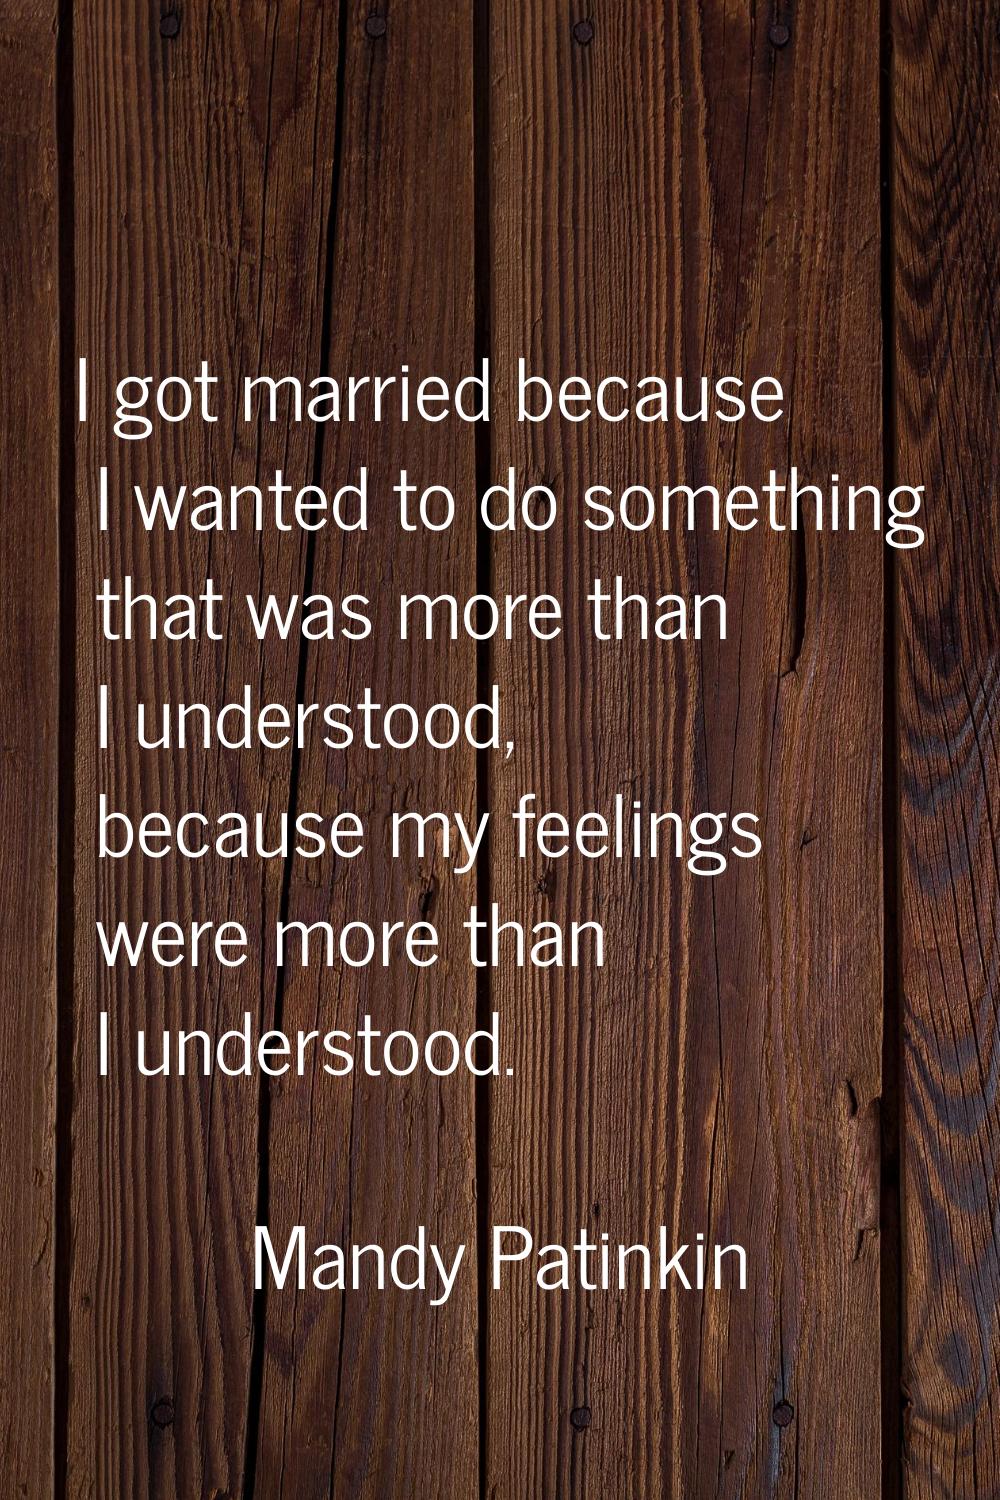 I got married because I wanted to do something that was more than I understood, because my feelings